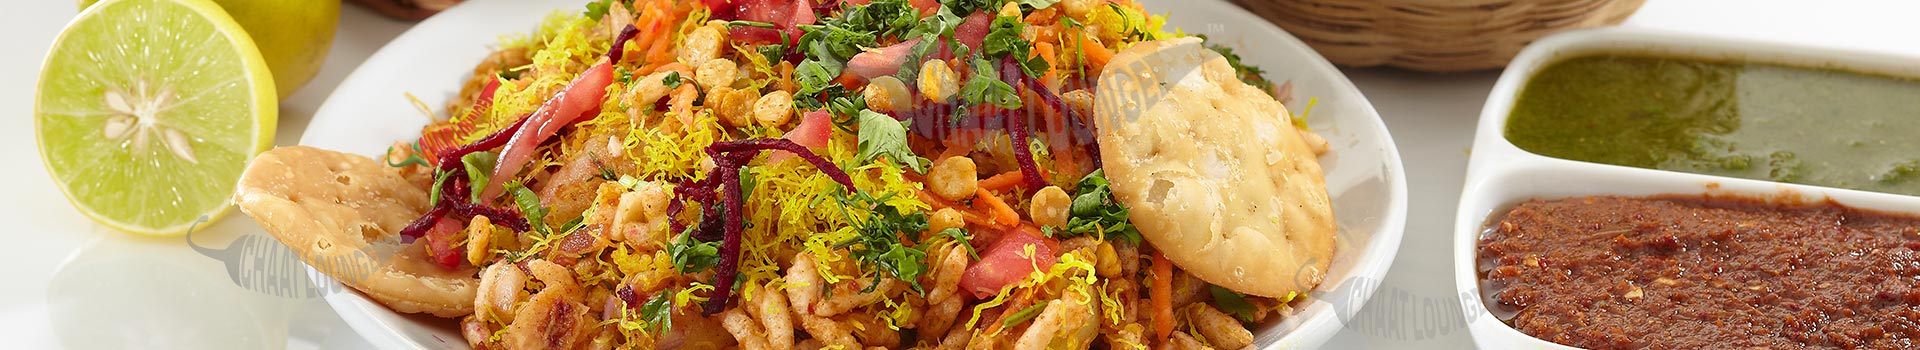 Chaat Franchise In India, About Chaat Lounge Franchise, Fast Food Franchise In India